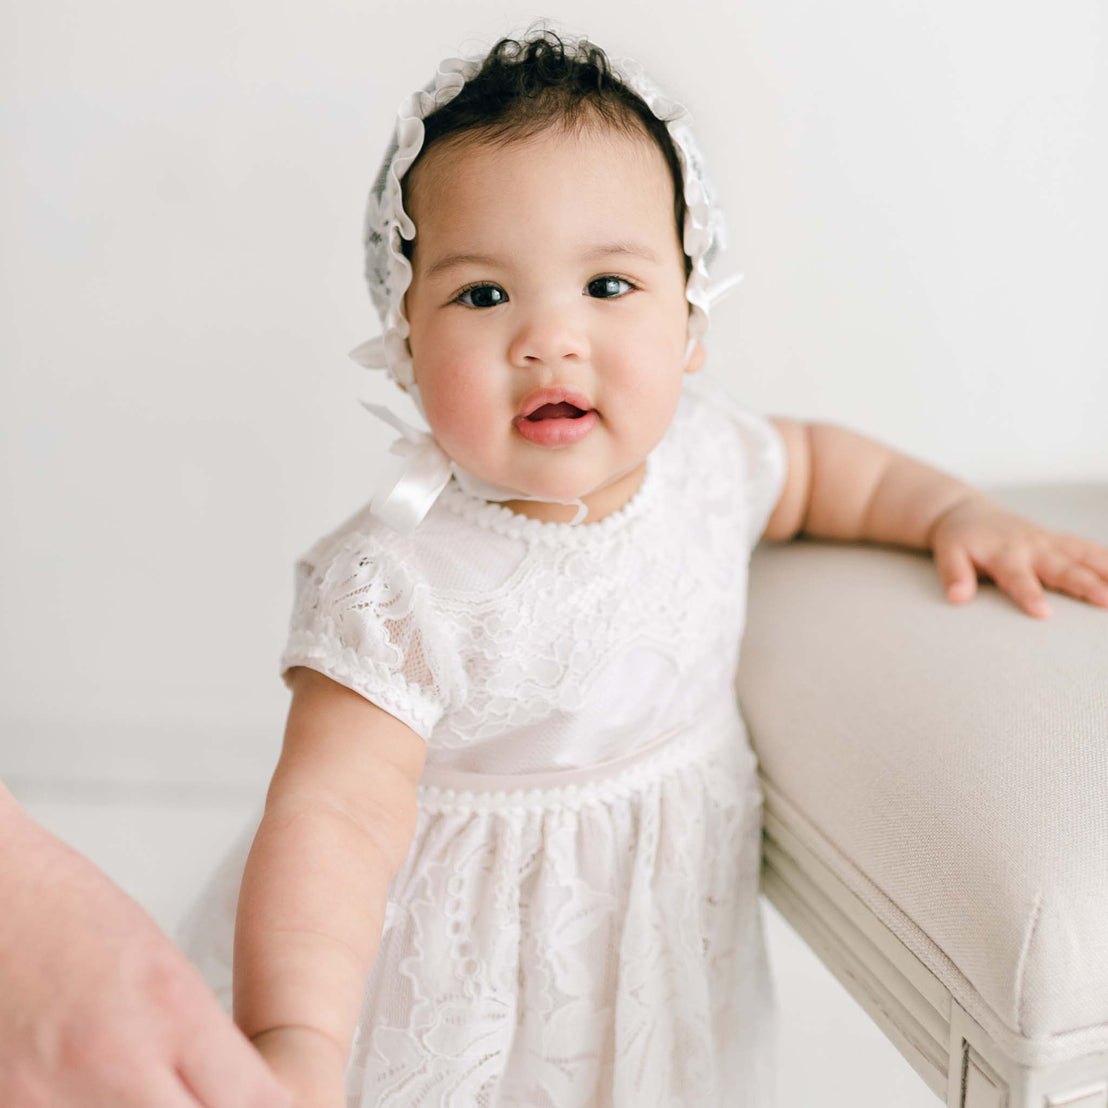 A baby wearing a Victoria Puff Sleeve Christening Dress and headband reaches out while looking at the camera, with a soft white background enhancing the serene atmosphere.